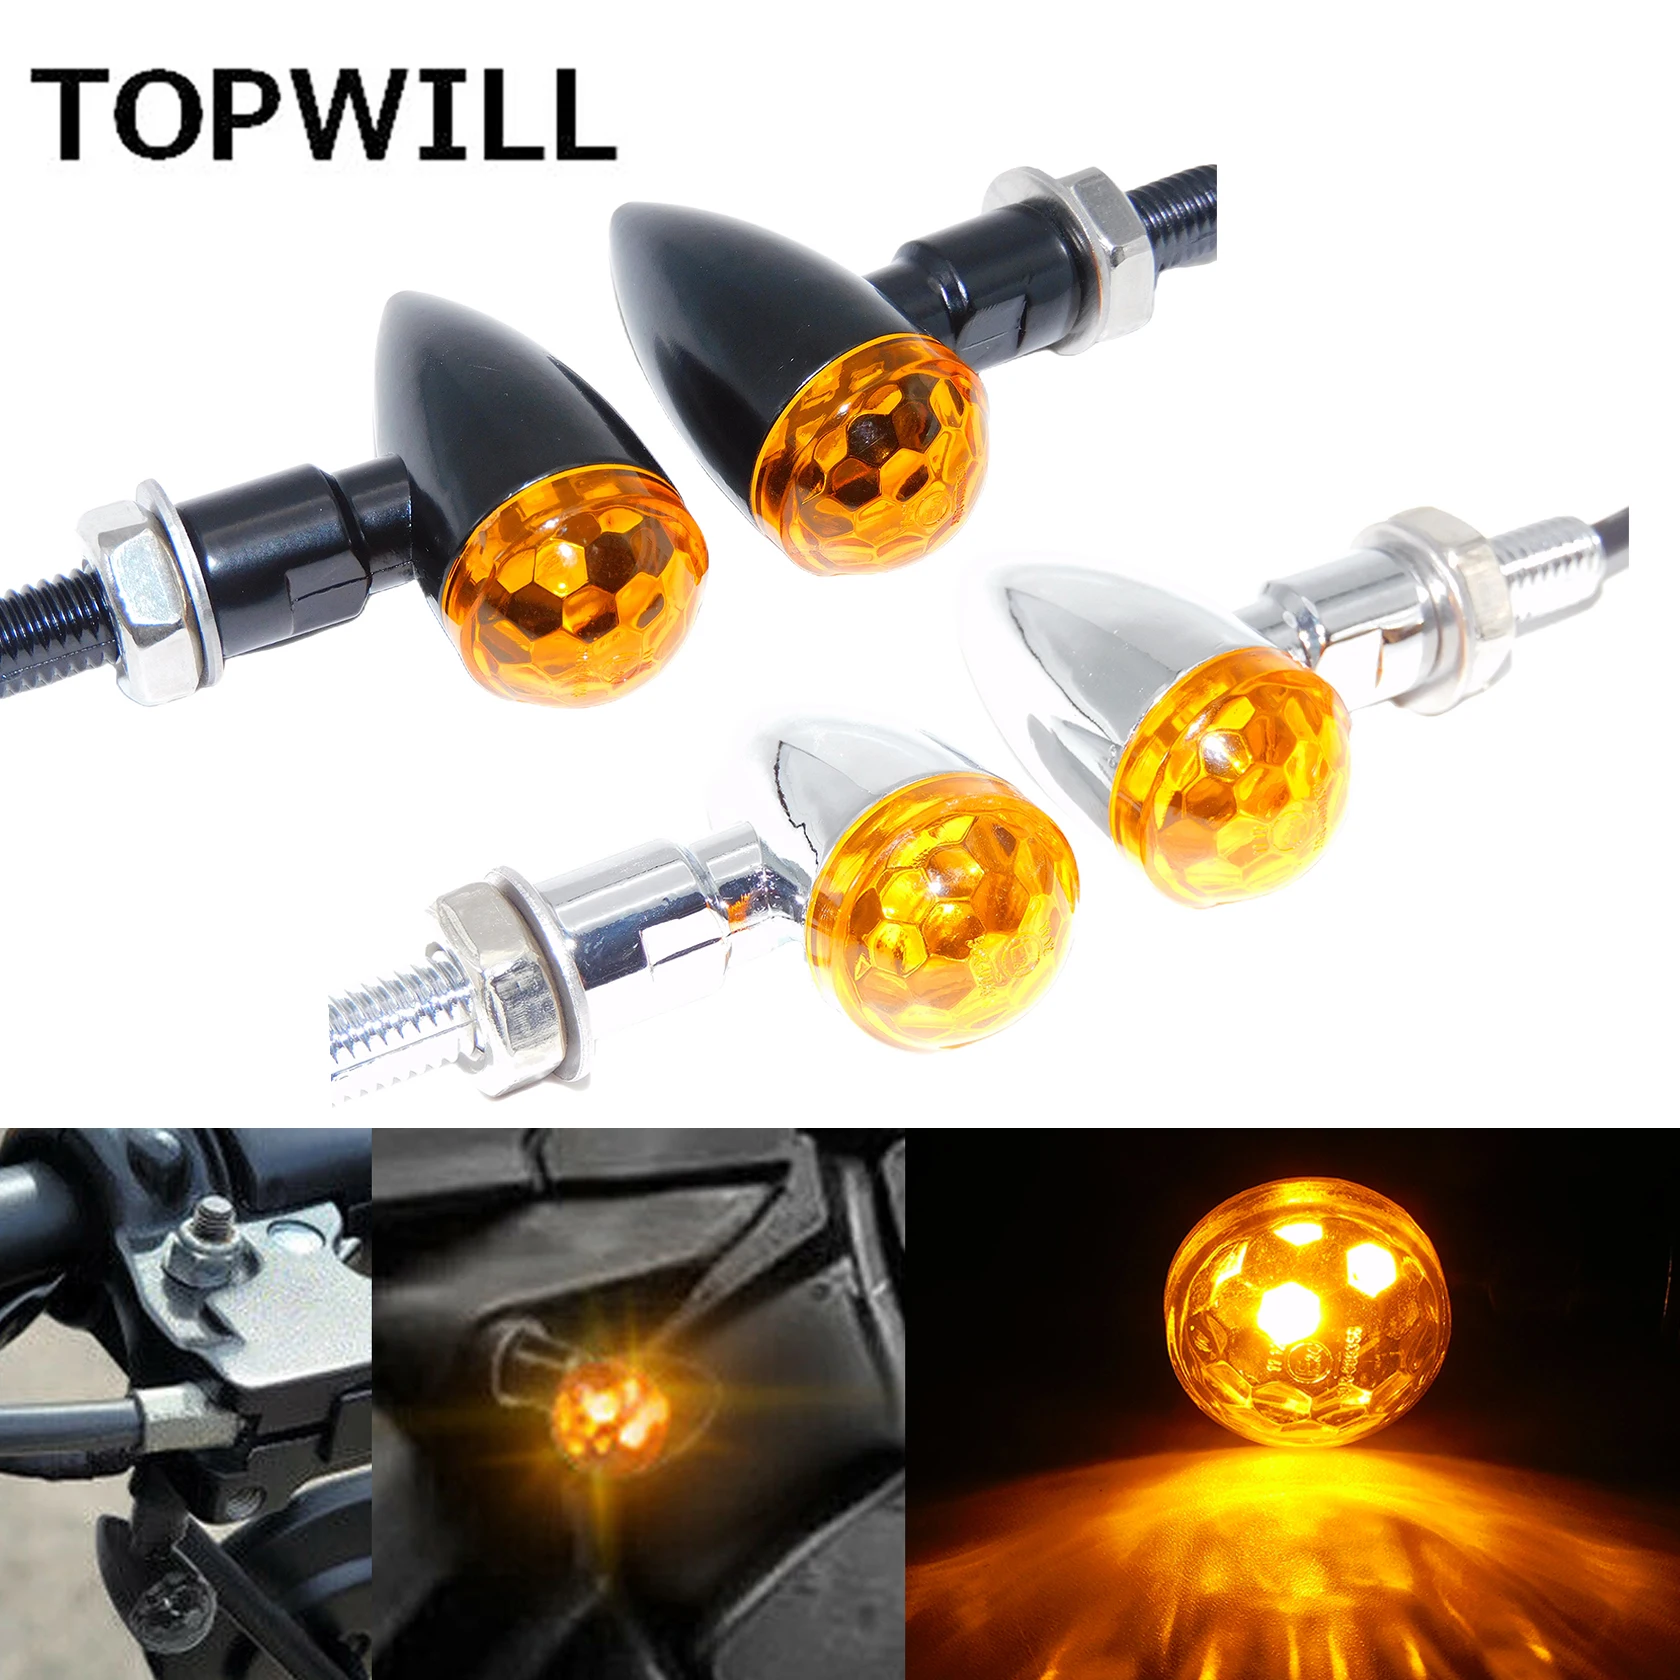 

2xMotorcycle Universal 12V Mini Bullet Amber Turn Signal Light Indicator Lamp For Harley Touring Sportster XL 883 Dyna Softail